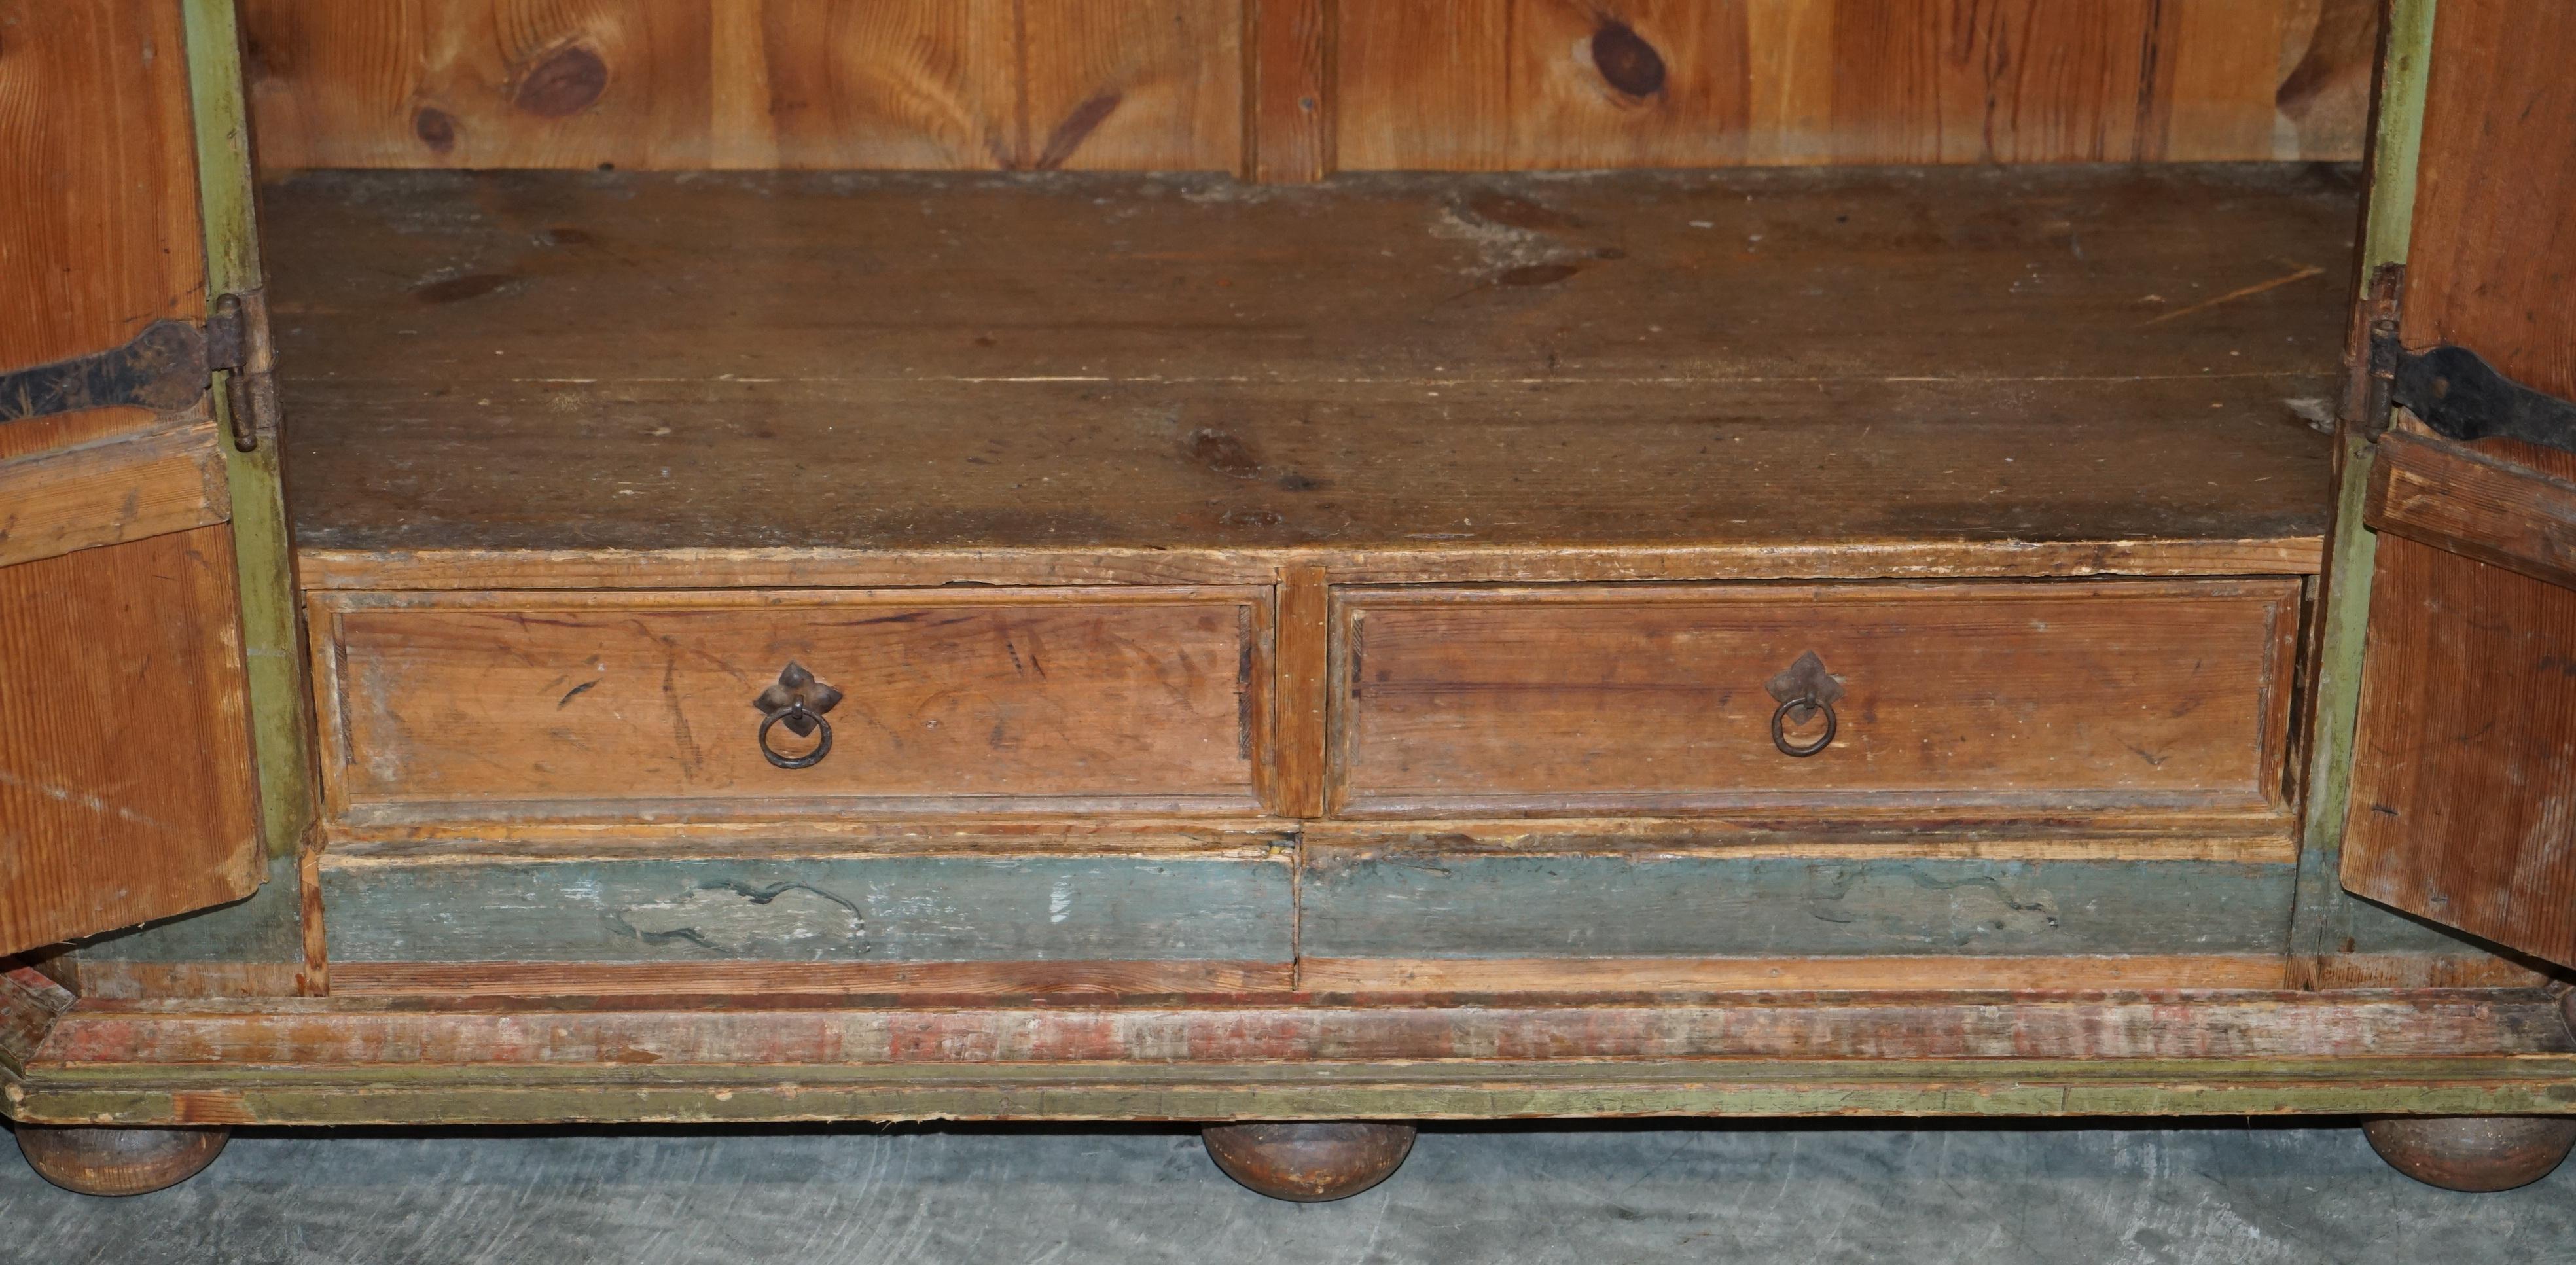 circa 1800 Sublime Hand Painted European Wardrobe or House Cupboard in Solid Oak For Sale 2